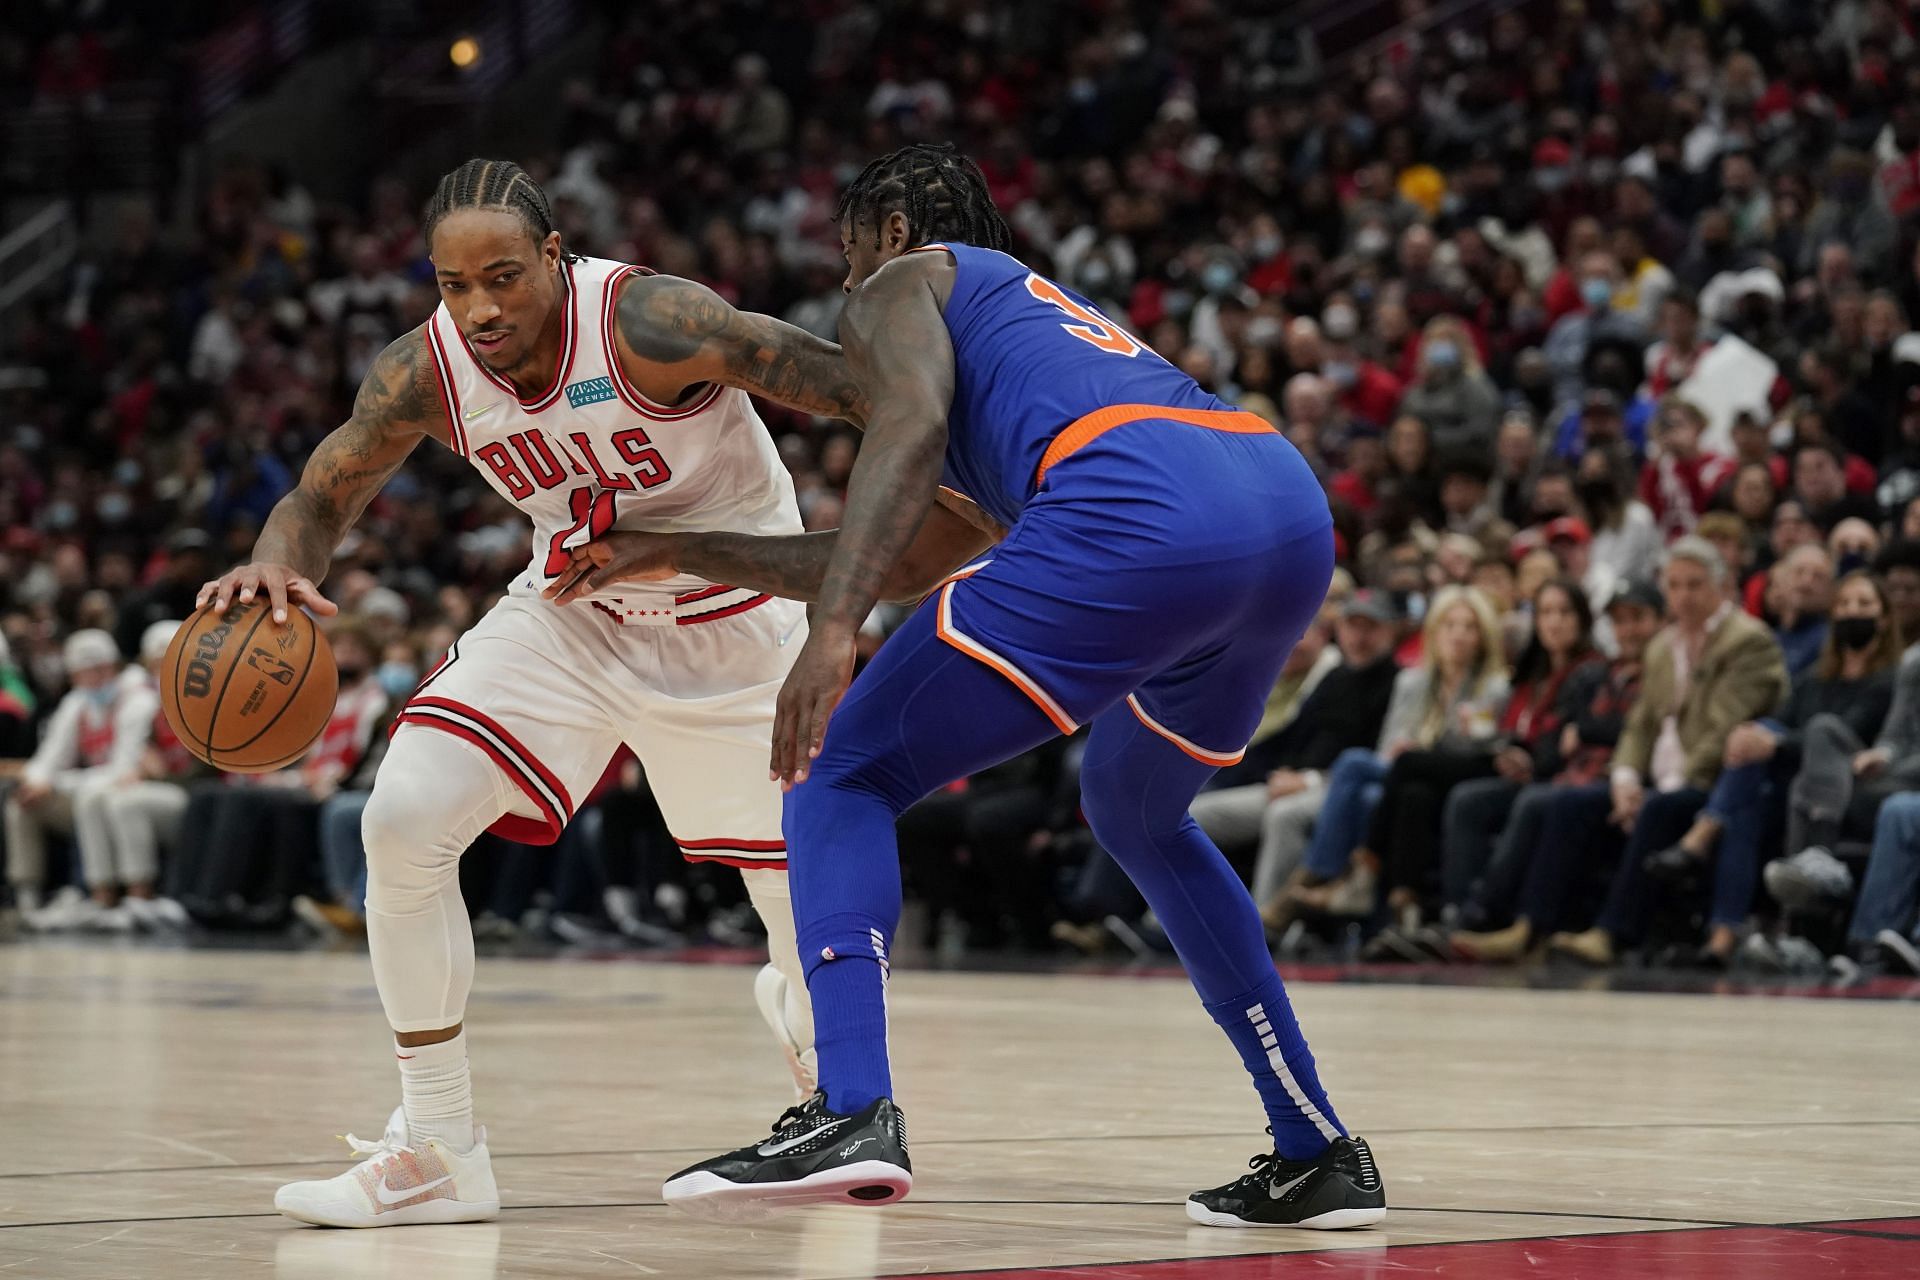 DeMar DeRozan #11 of the Chicago Bulls dribbles the ball against Julius Randle #30 of the New York Knicks